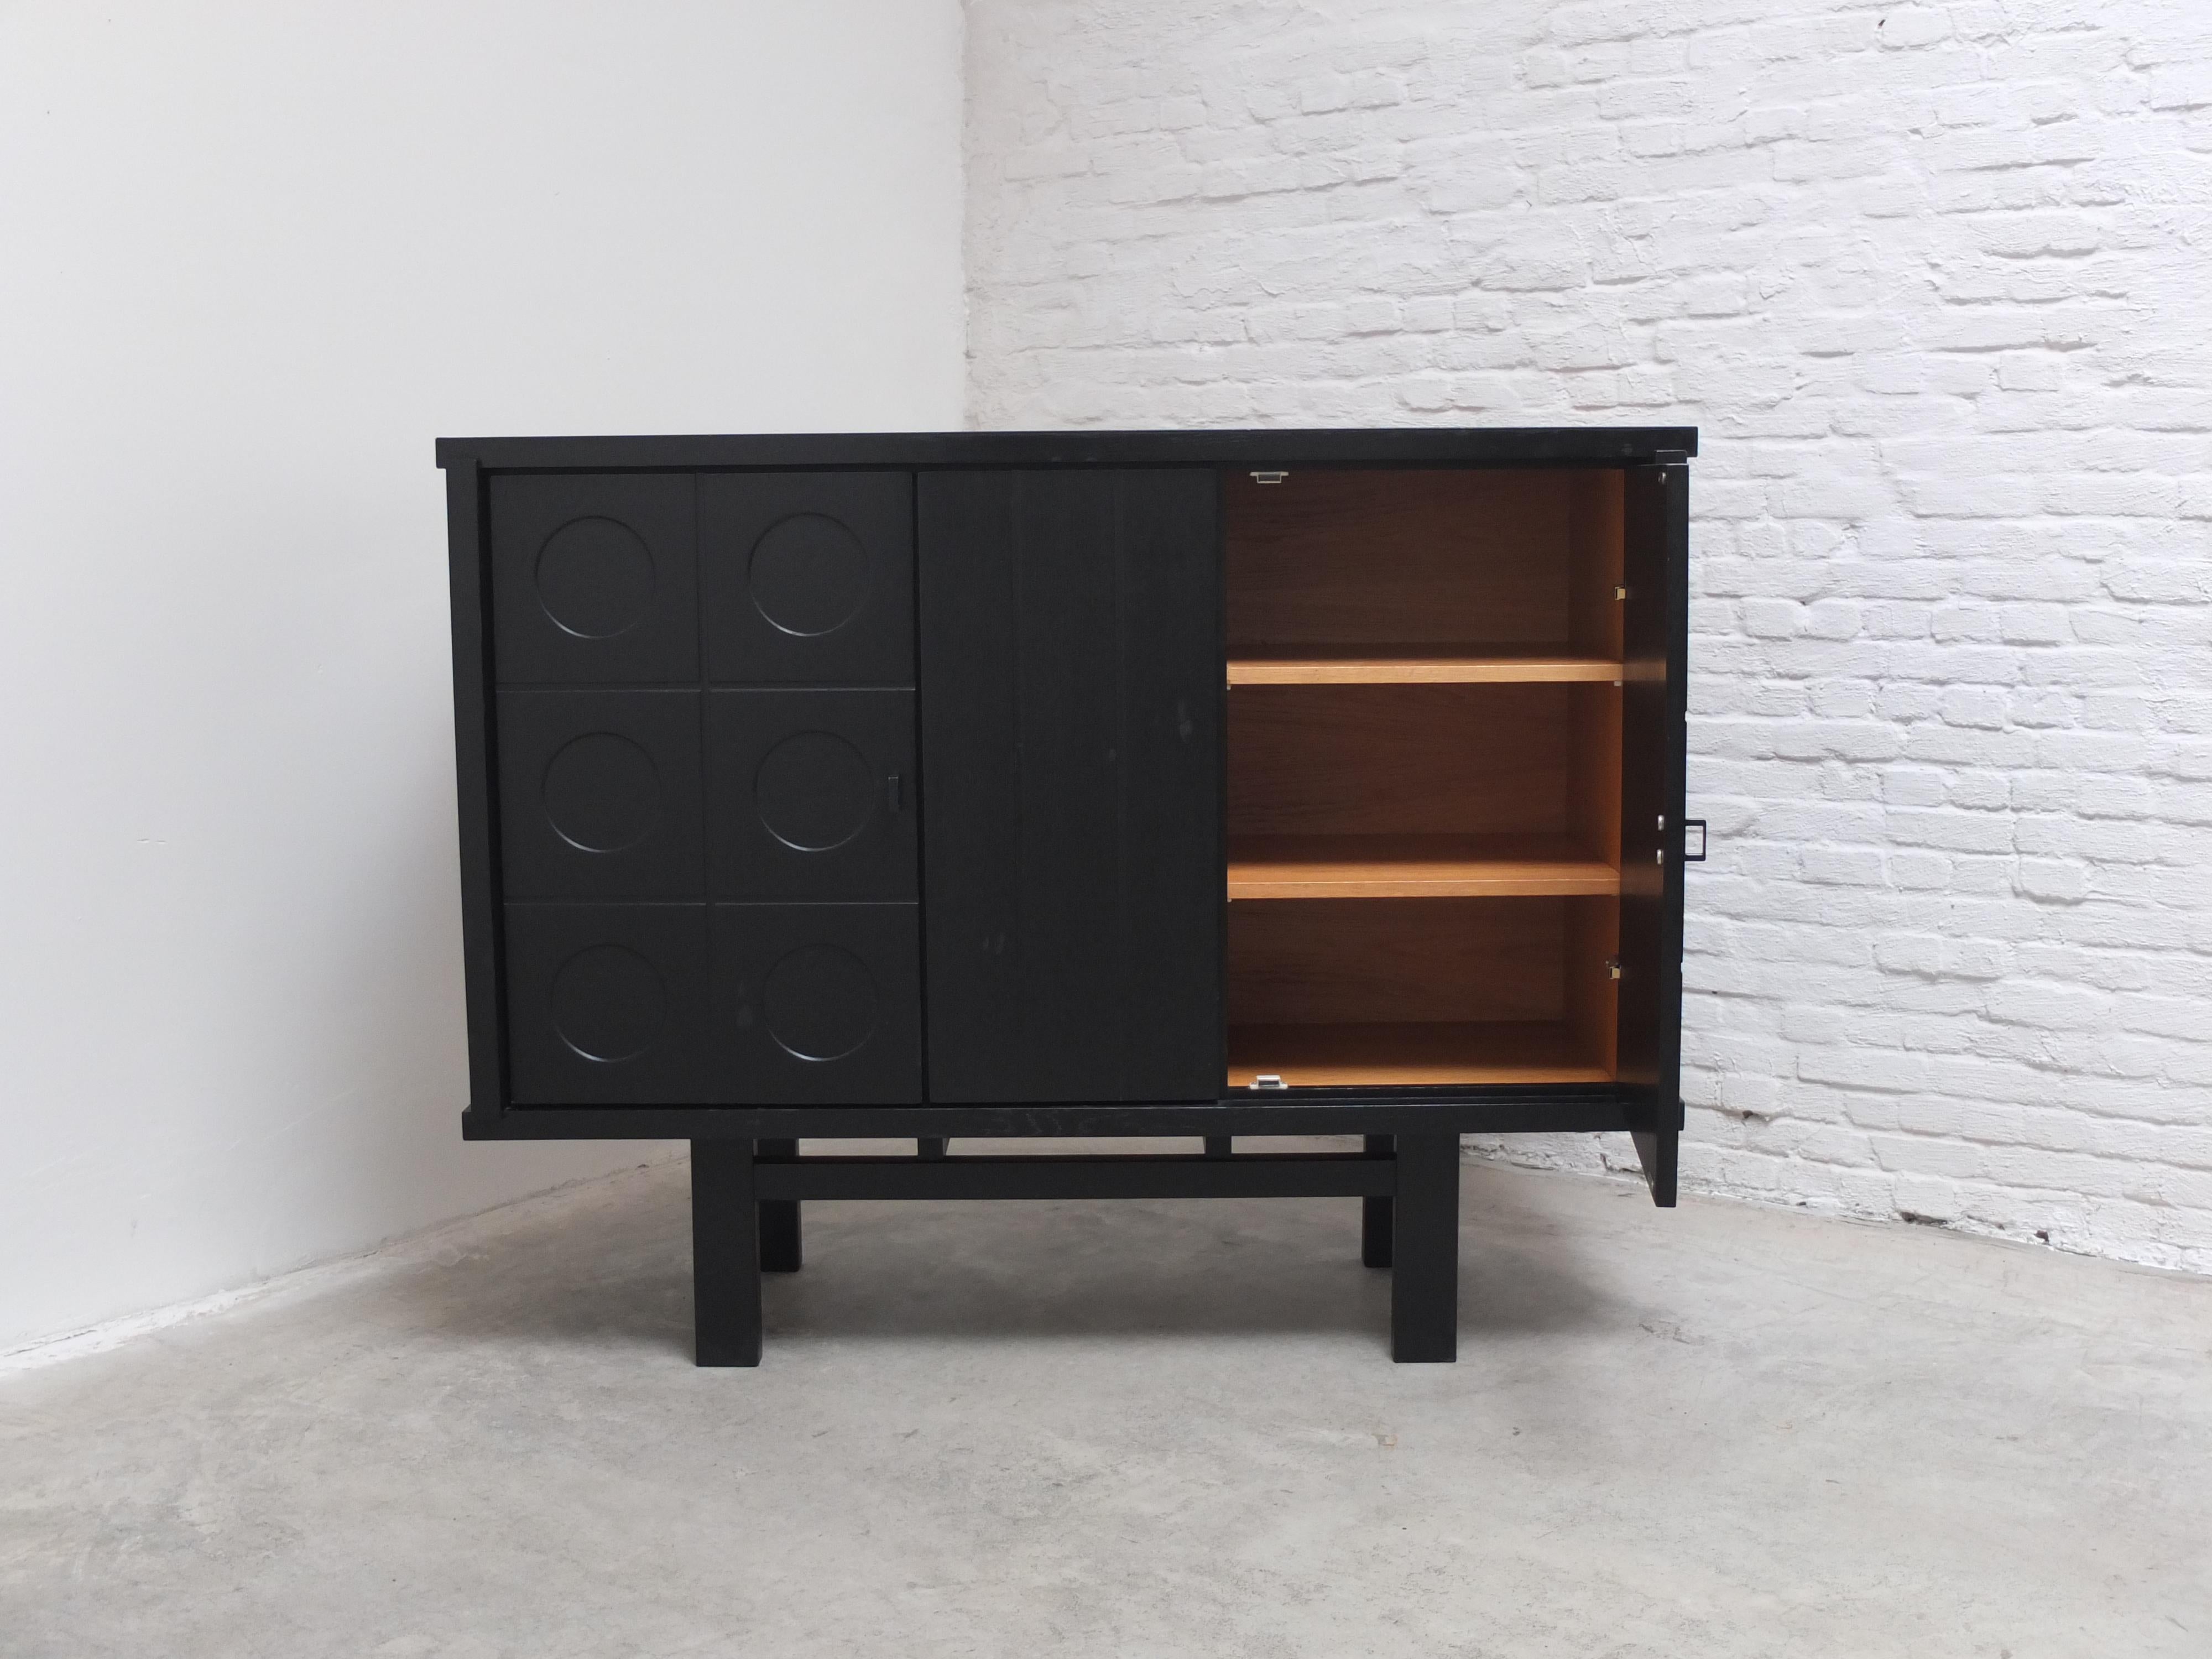 Belgian Graphical Cabinet in Black Stained Oak, 1970s For Sale 7